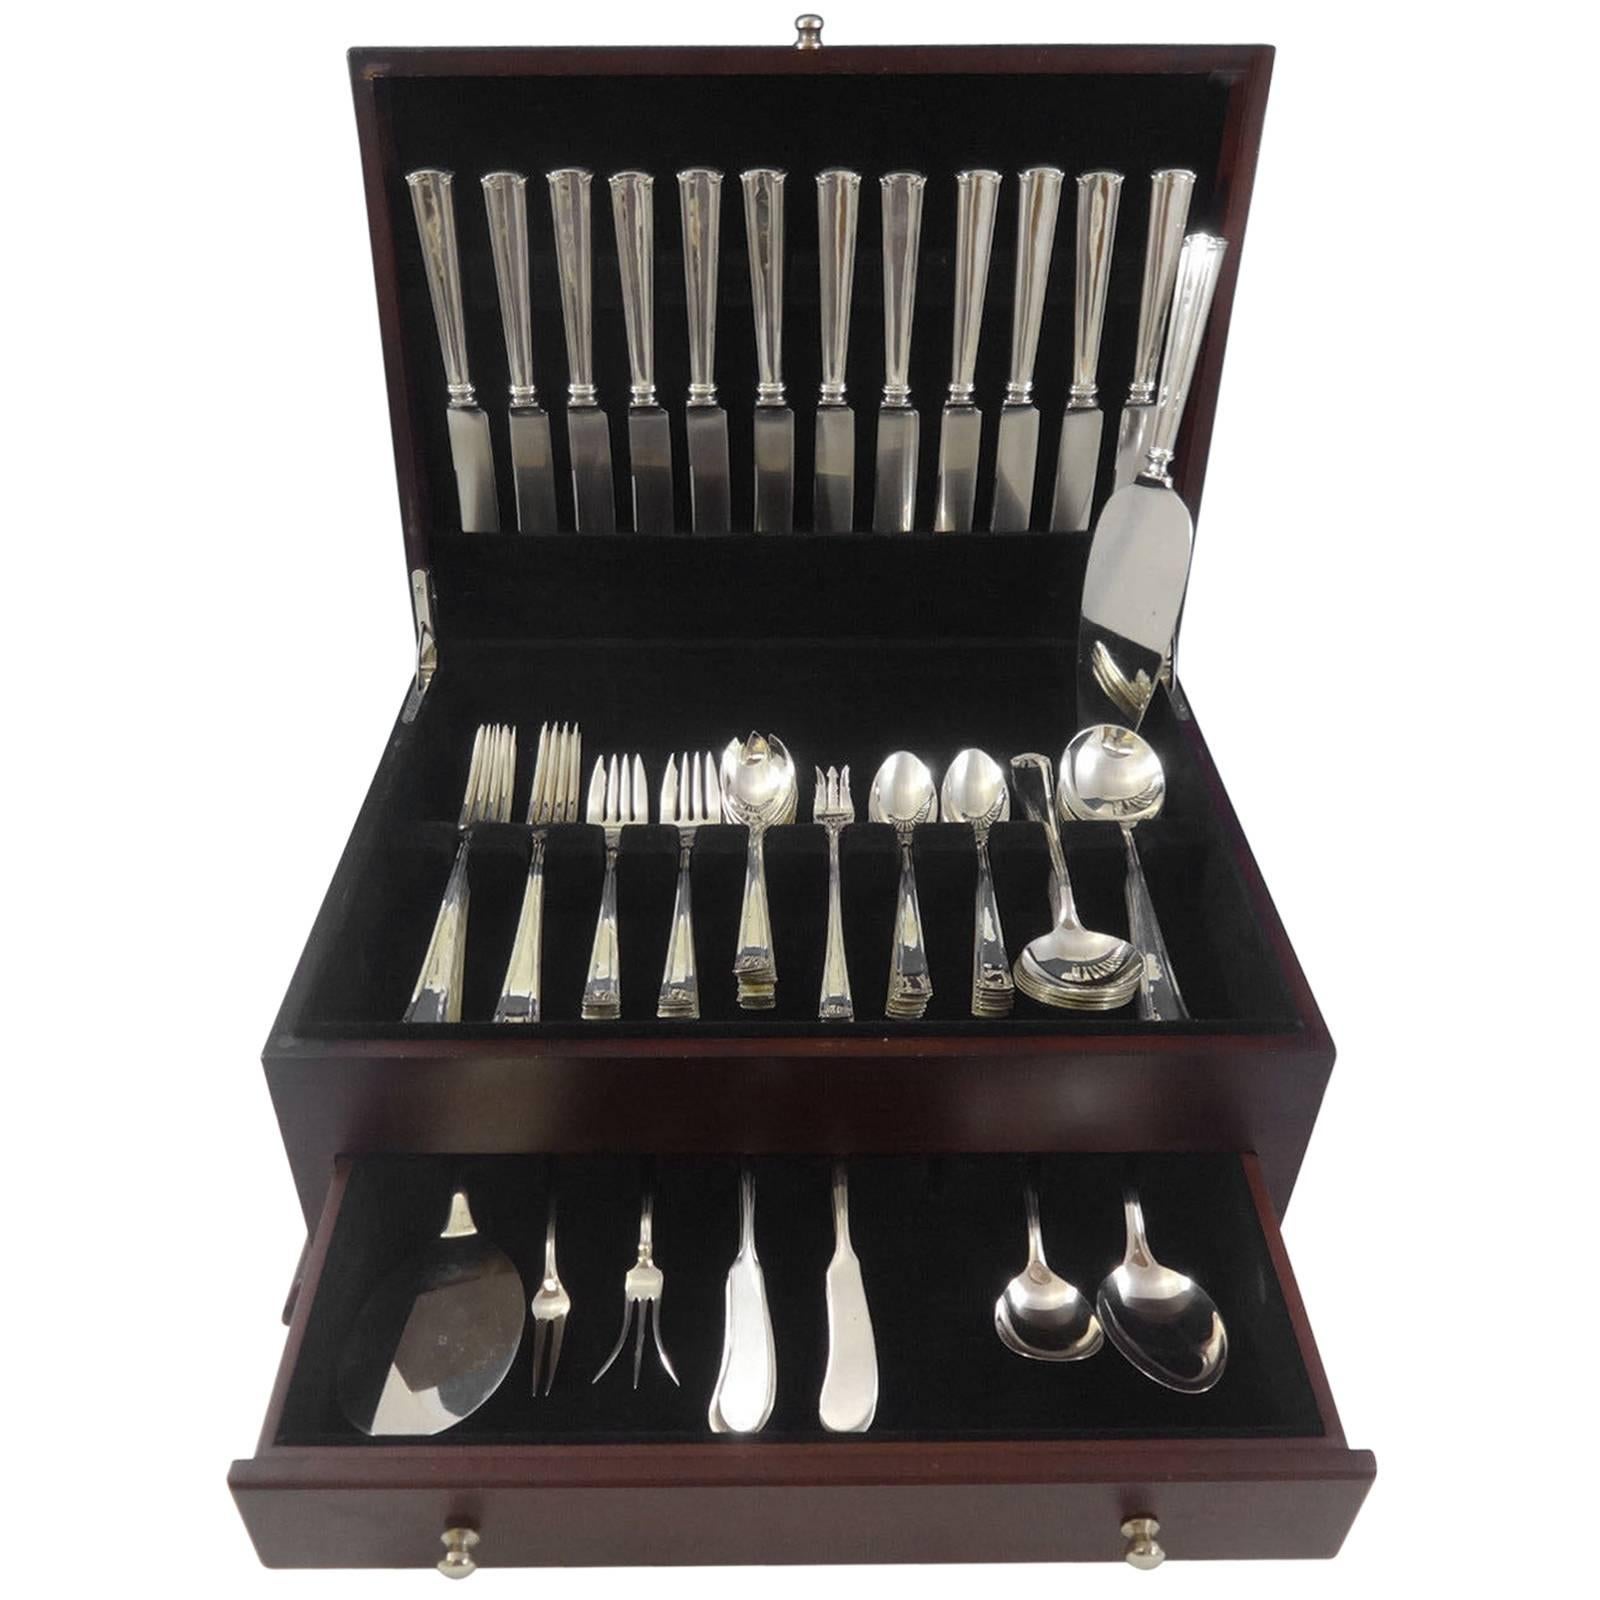 Beautiful Wentworth by Watson sterling silver flatware service, 102 pieces. This monumental Art Deco set includes:

12 knives, 8 3/4